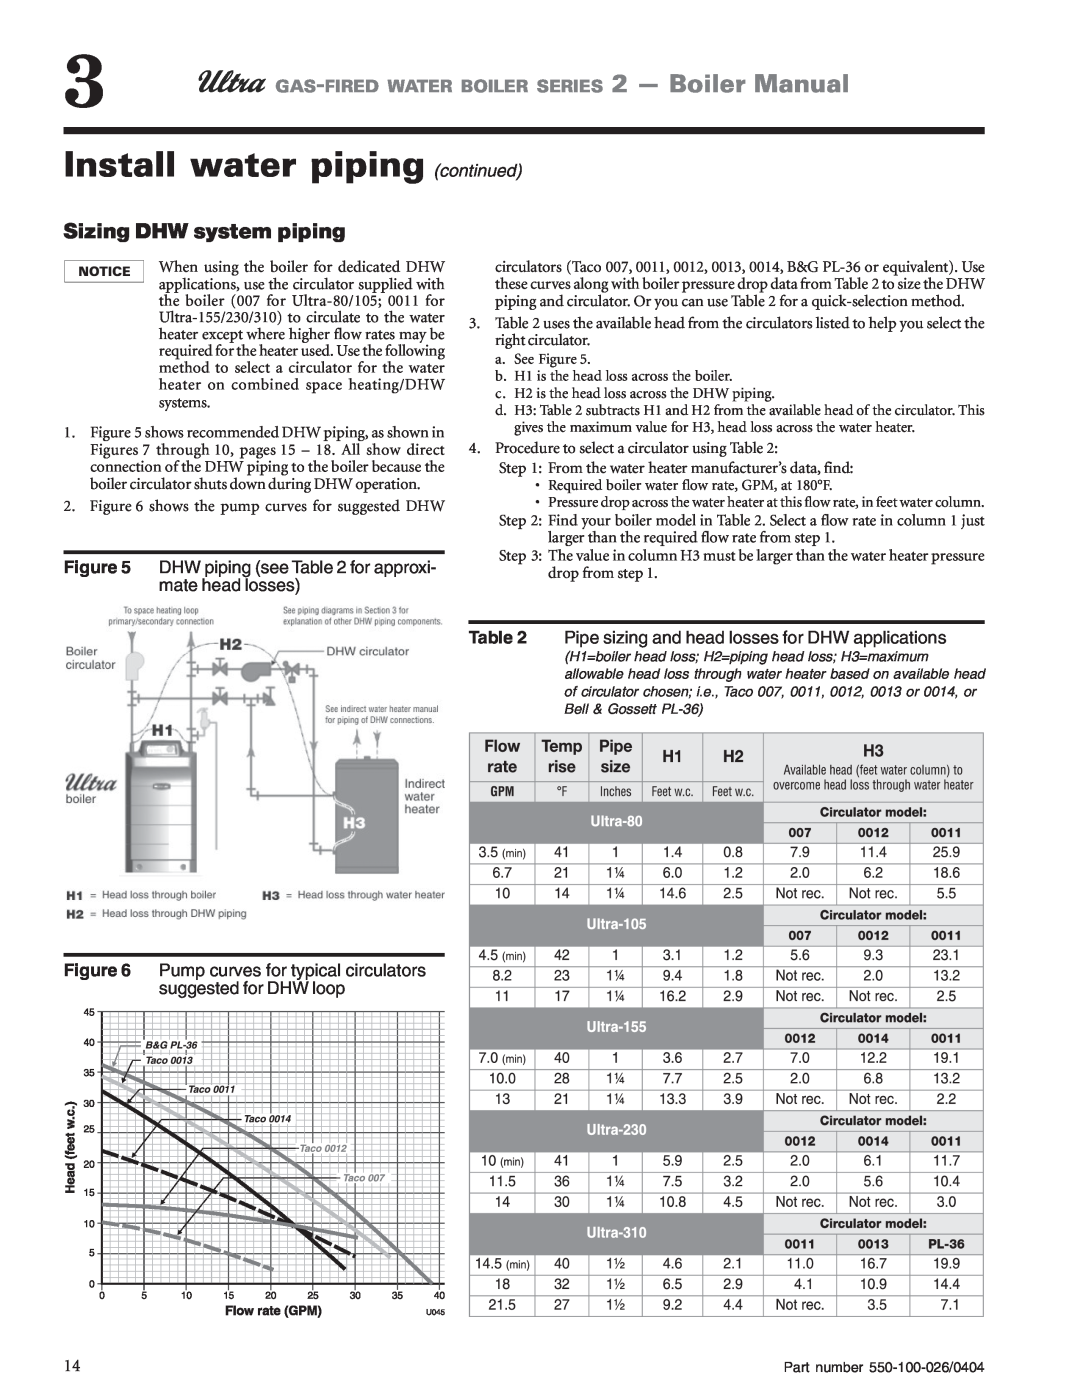 Ultra electronic 230 & -310, 105, 80, 155 manual Install water piping continued, Sizing DHW system piping 